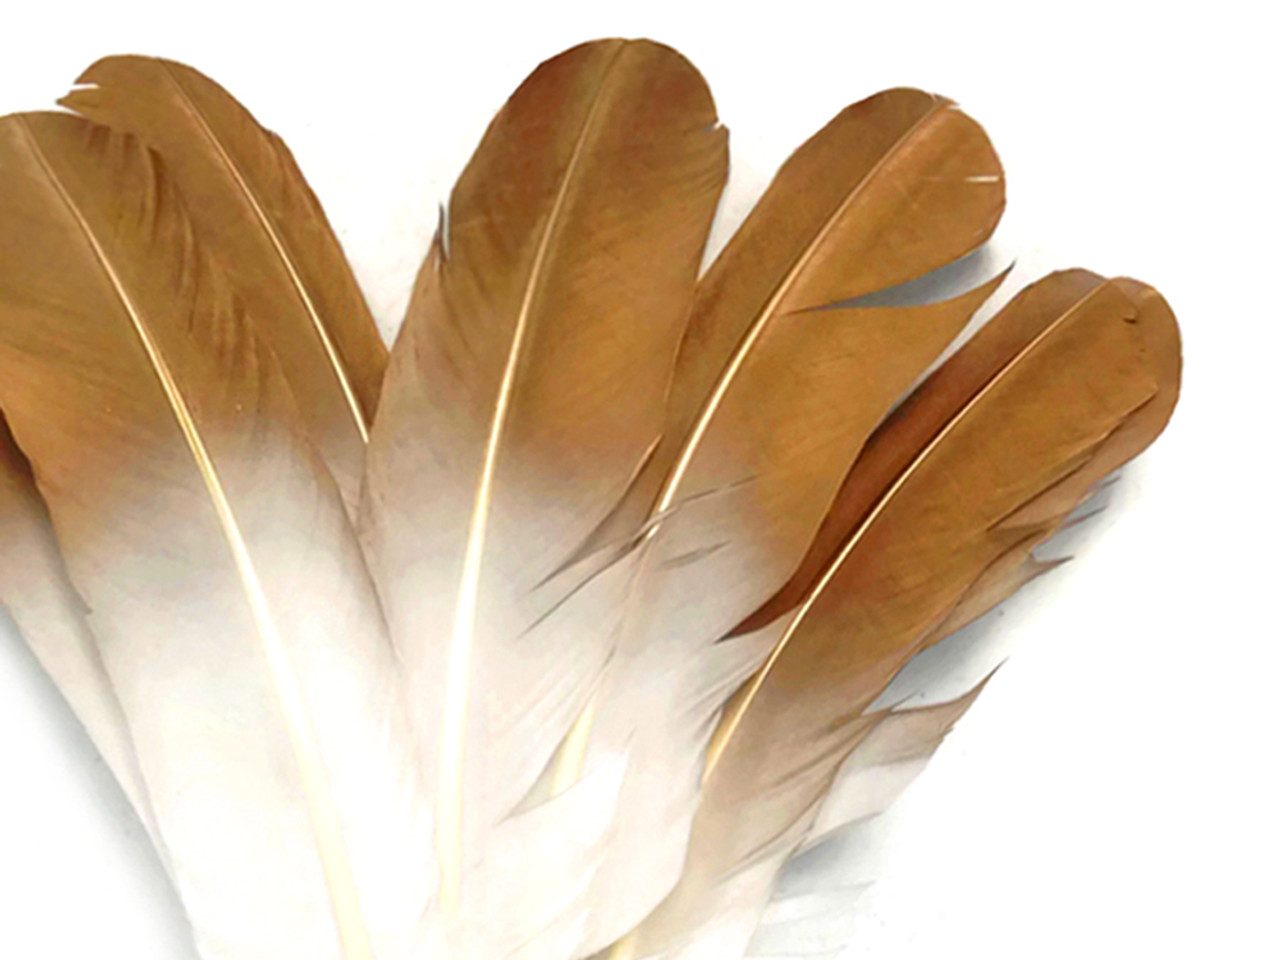 6 Pieces - Light Brown Turkey Rounds Secondary Wing Quill Feathers